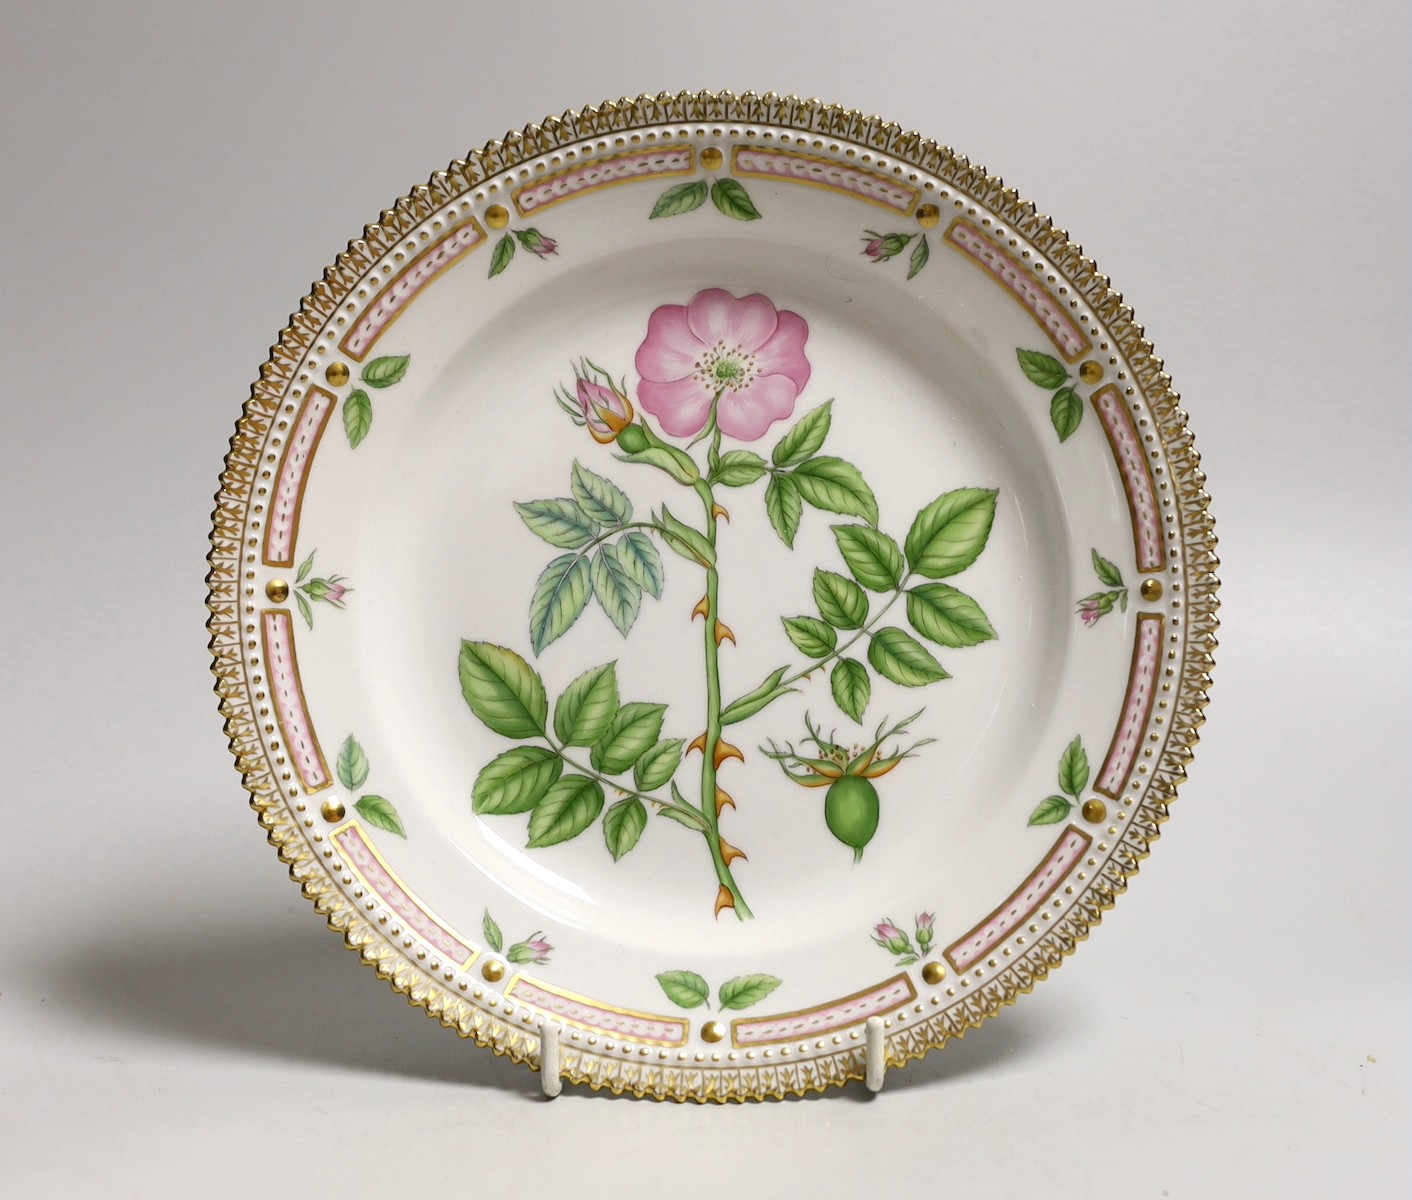 A Royal Copenhagen Flora Danica plate painted with Rosa canina, titled